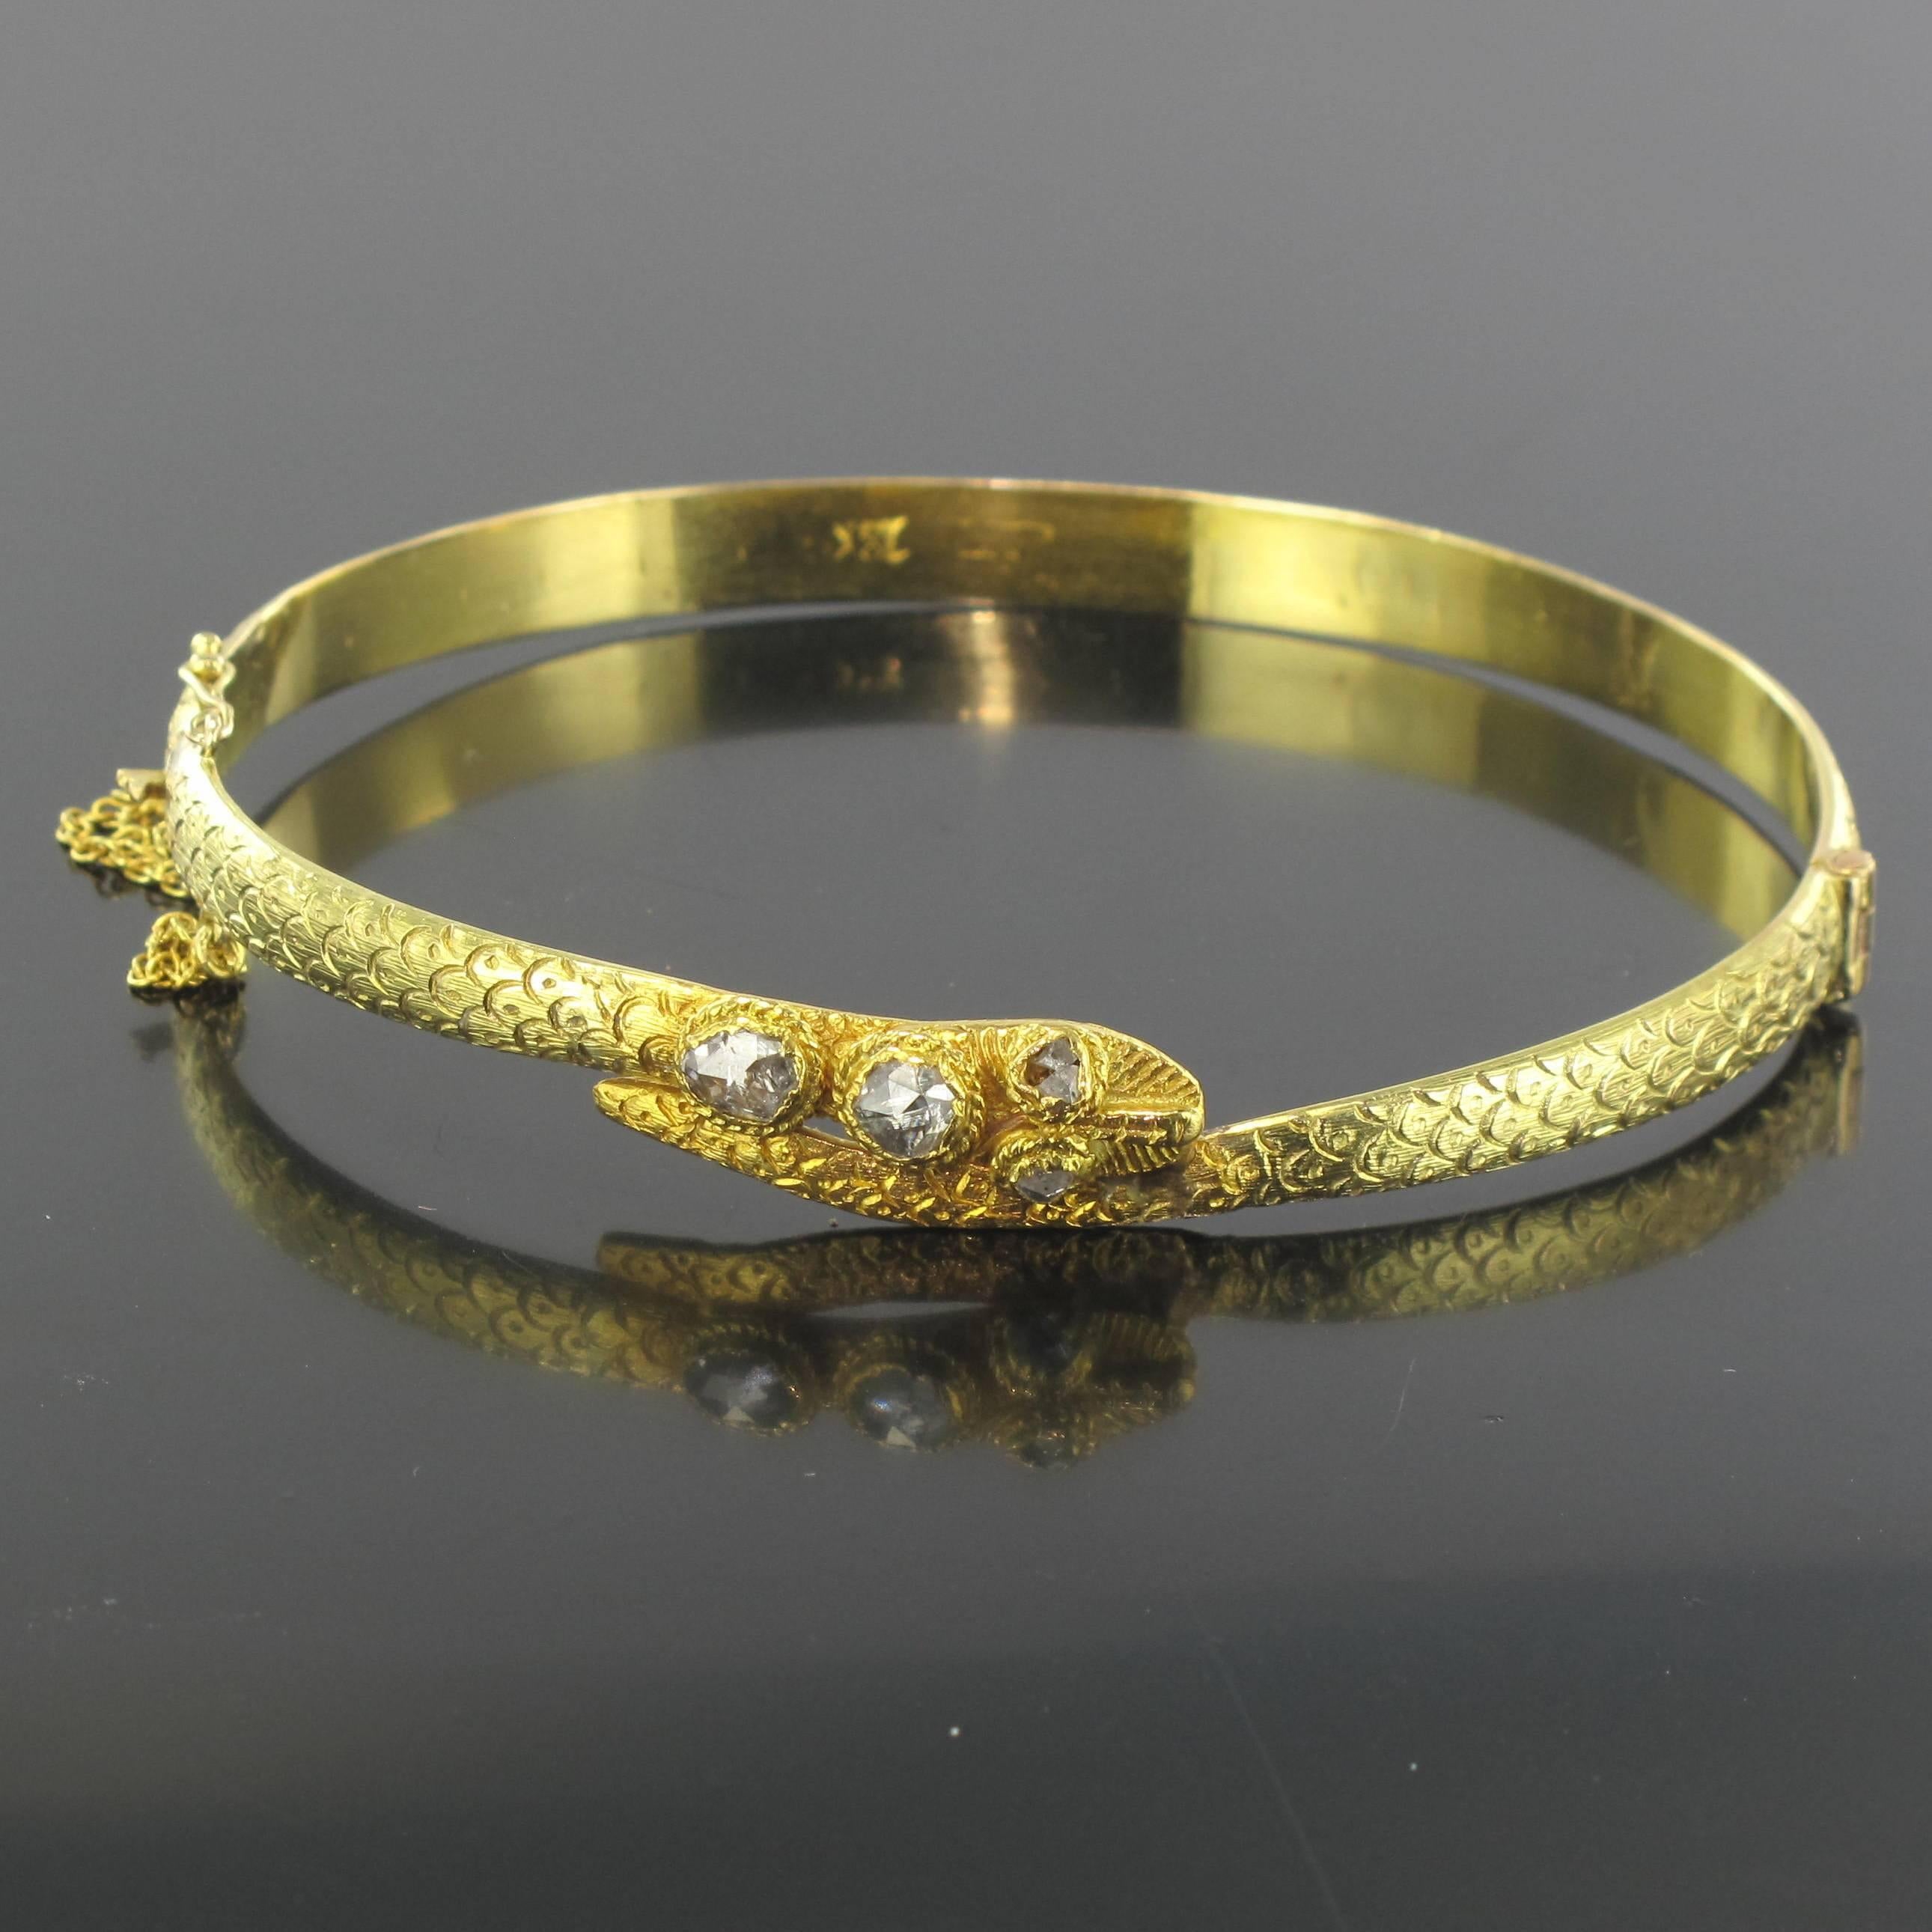 18 carat Yellow gold bracelet. 

This ravishing antique oval bangle bracelet is in the form of a snake curled around the wrist. The scales are delicately engraved on the entire top surface. The head is set with 4 rose cut diamonds; those of the